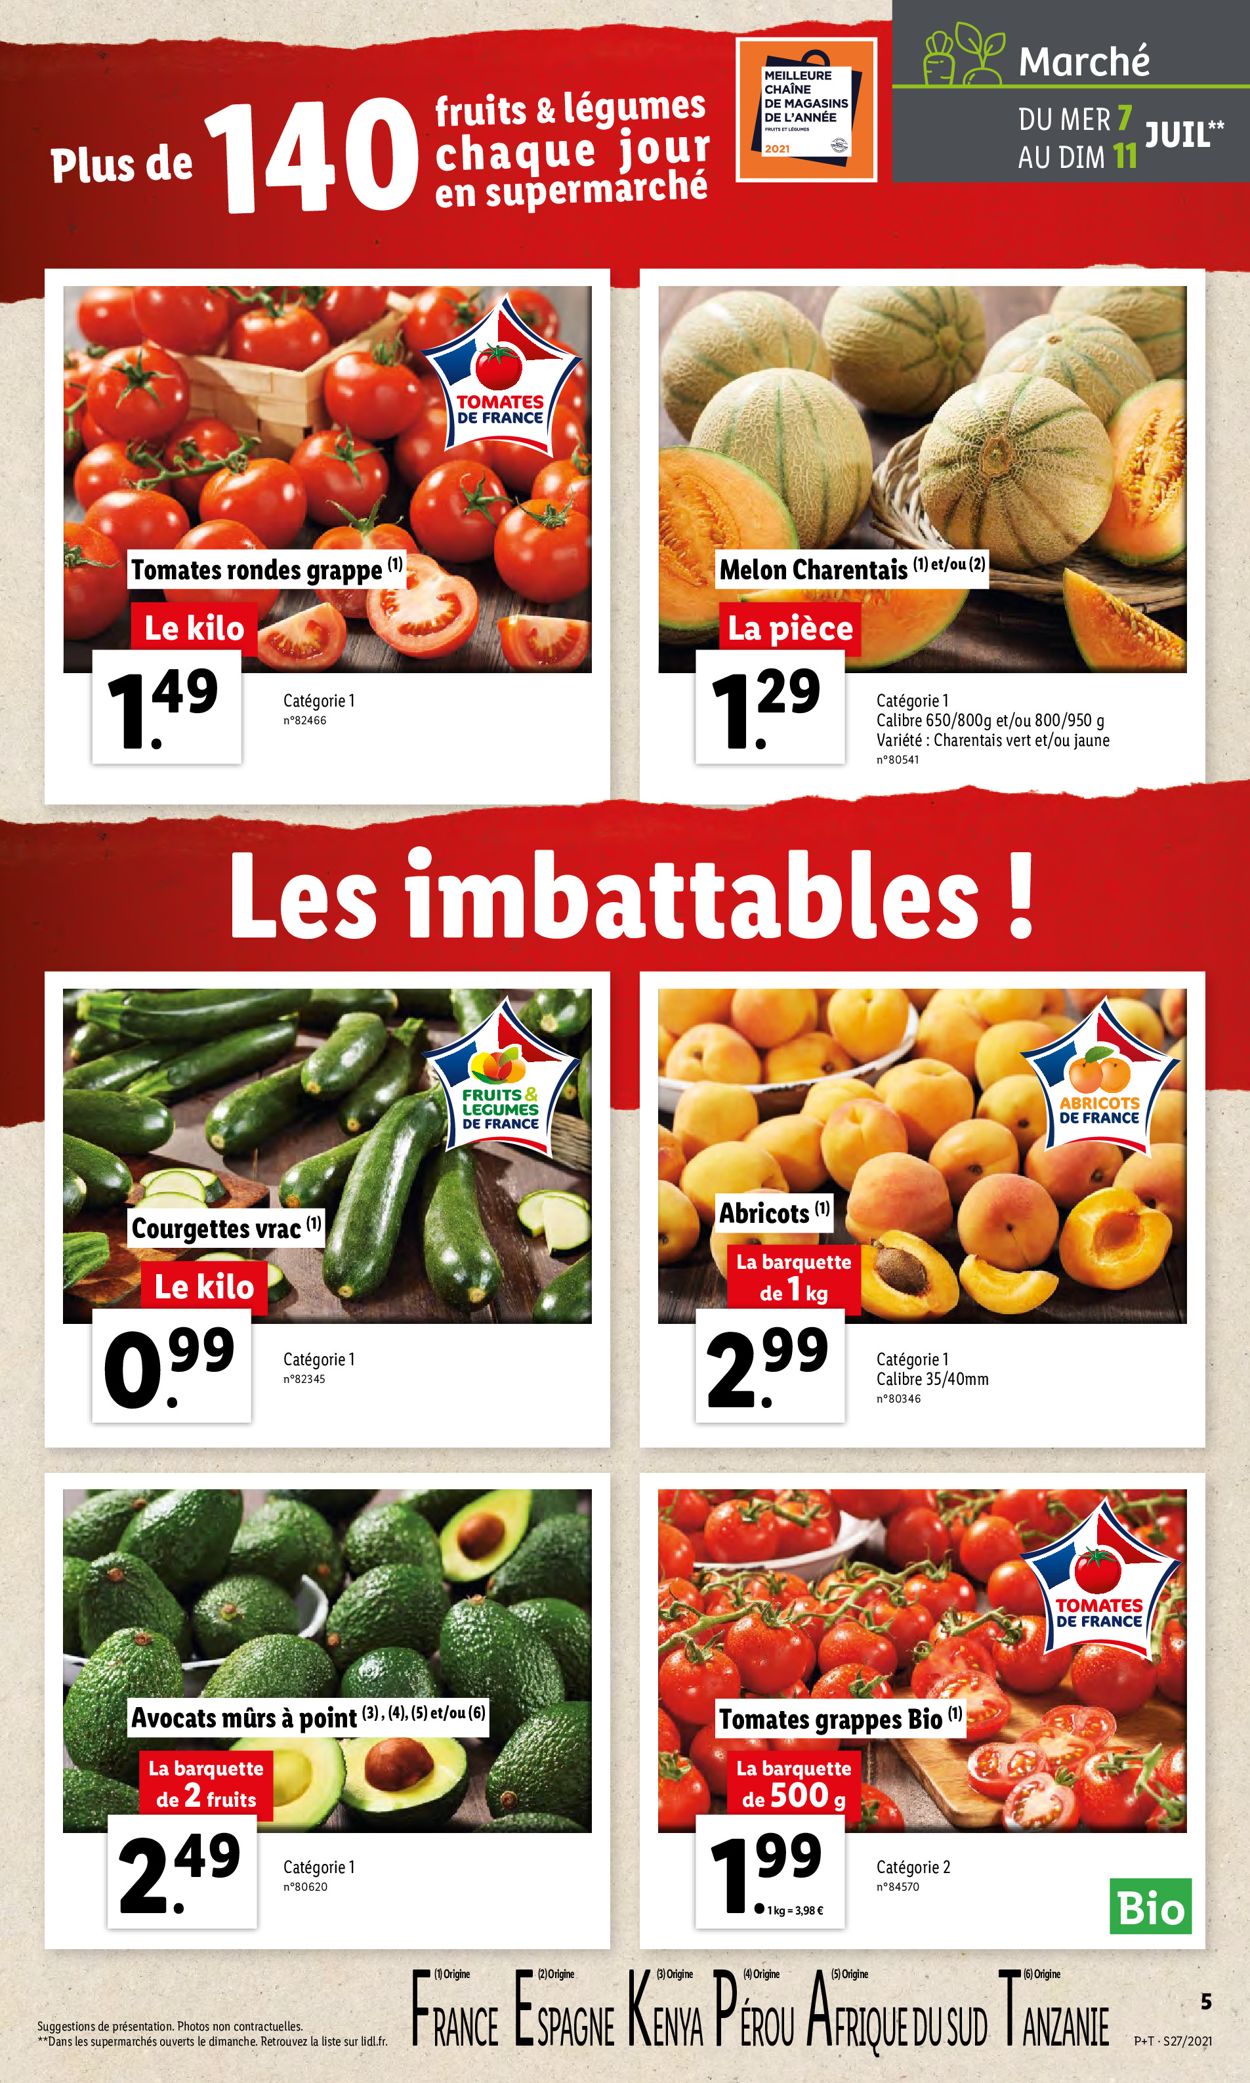 Lidl Catalogue - 07.07-13.07.2021 (Page 5)